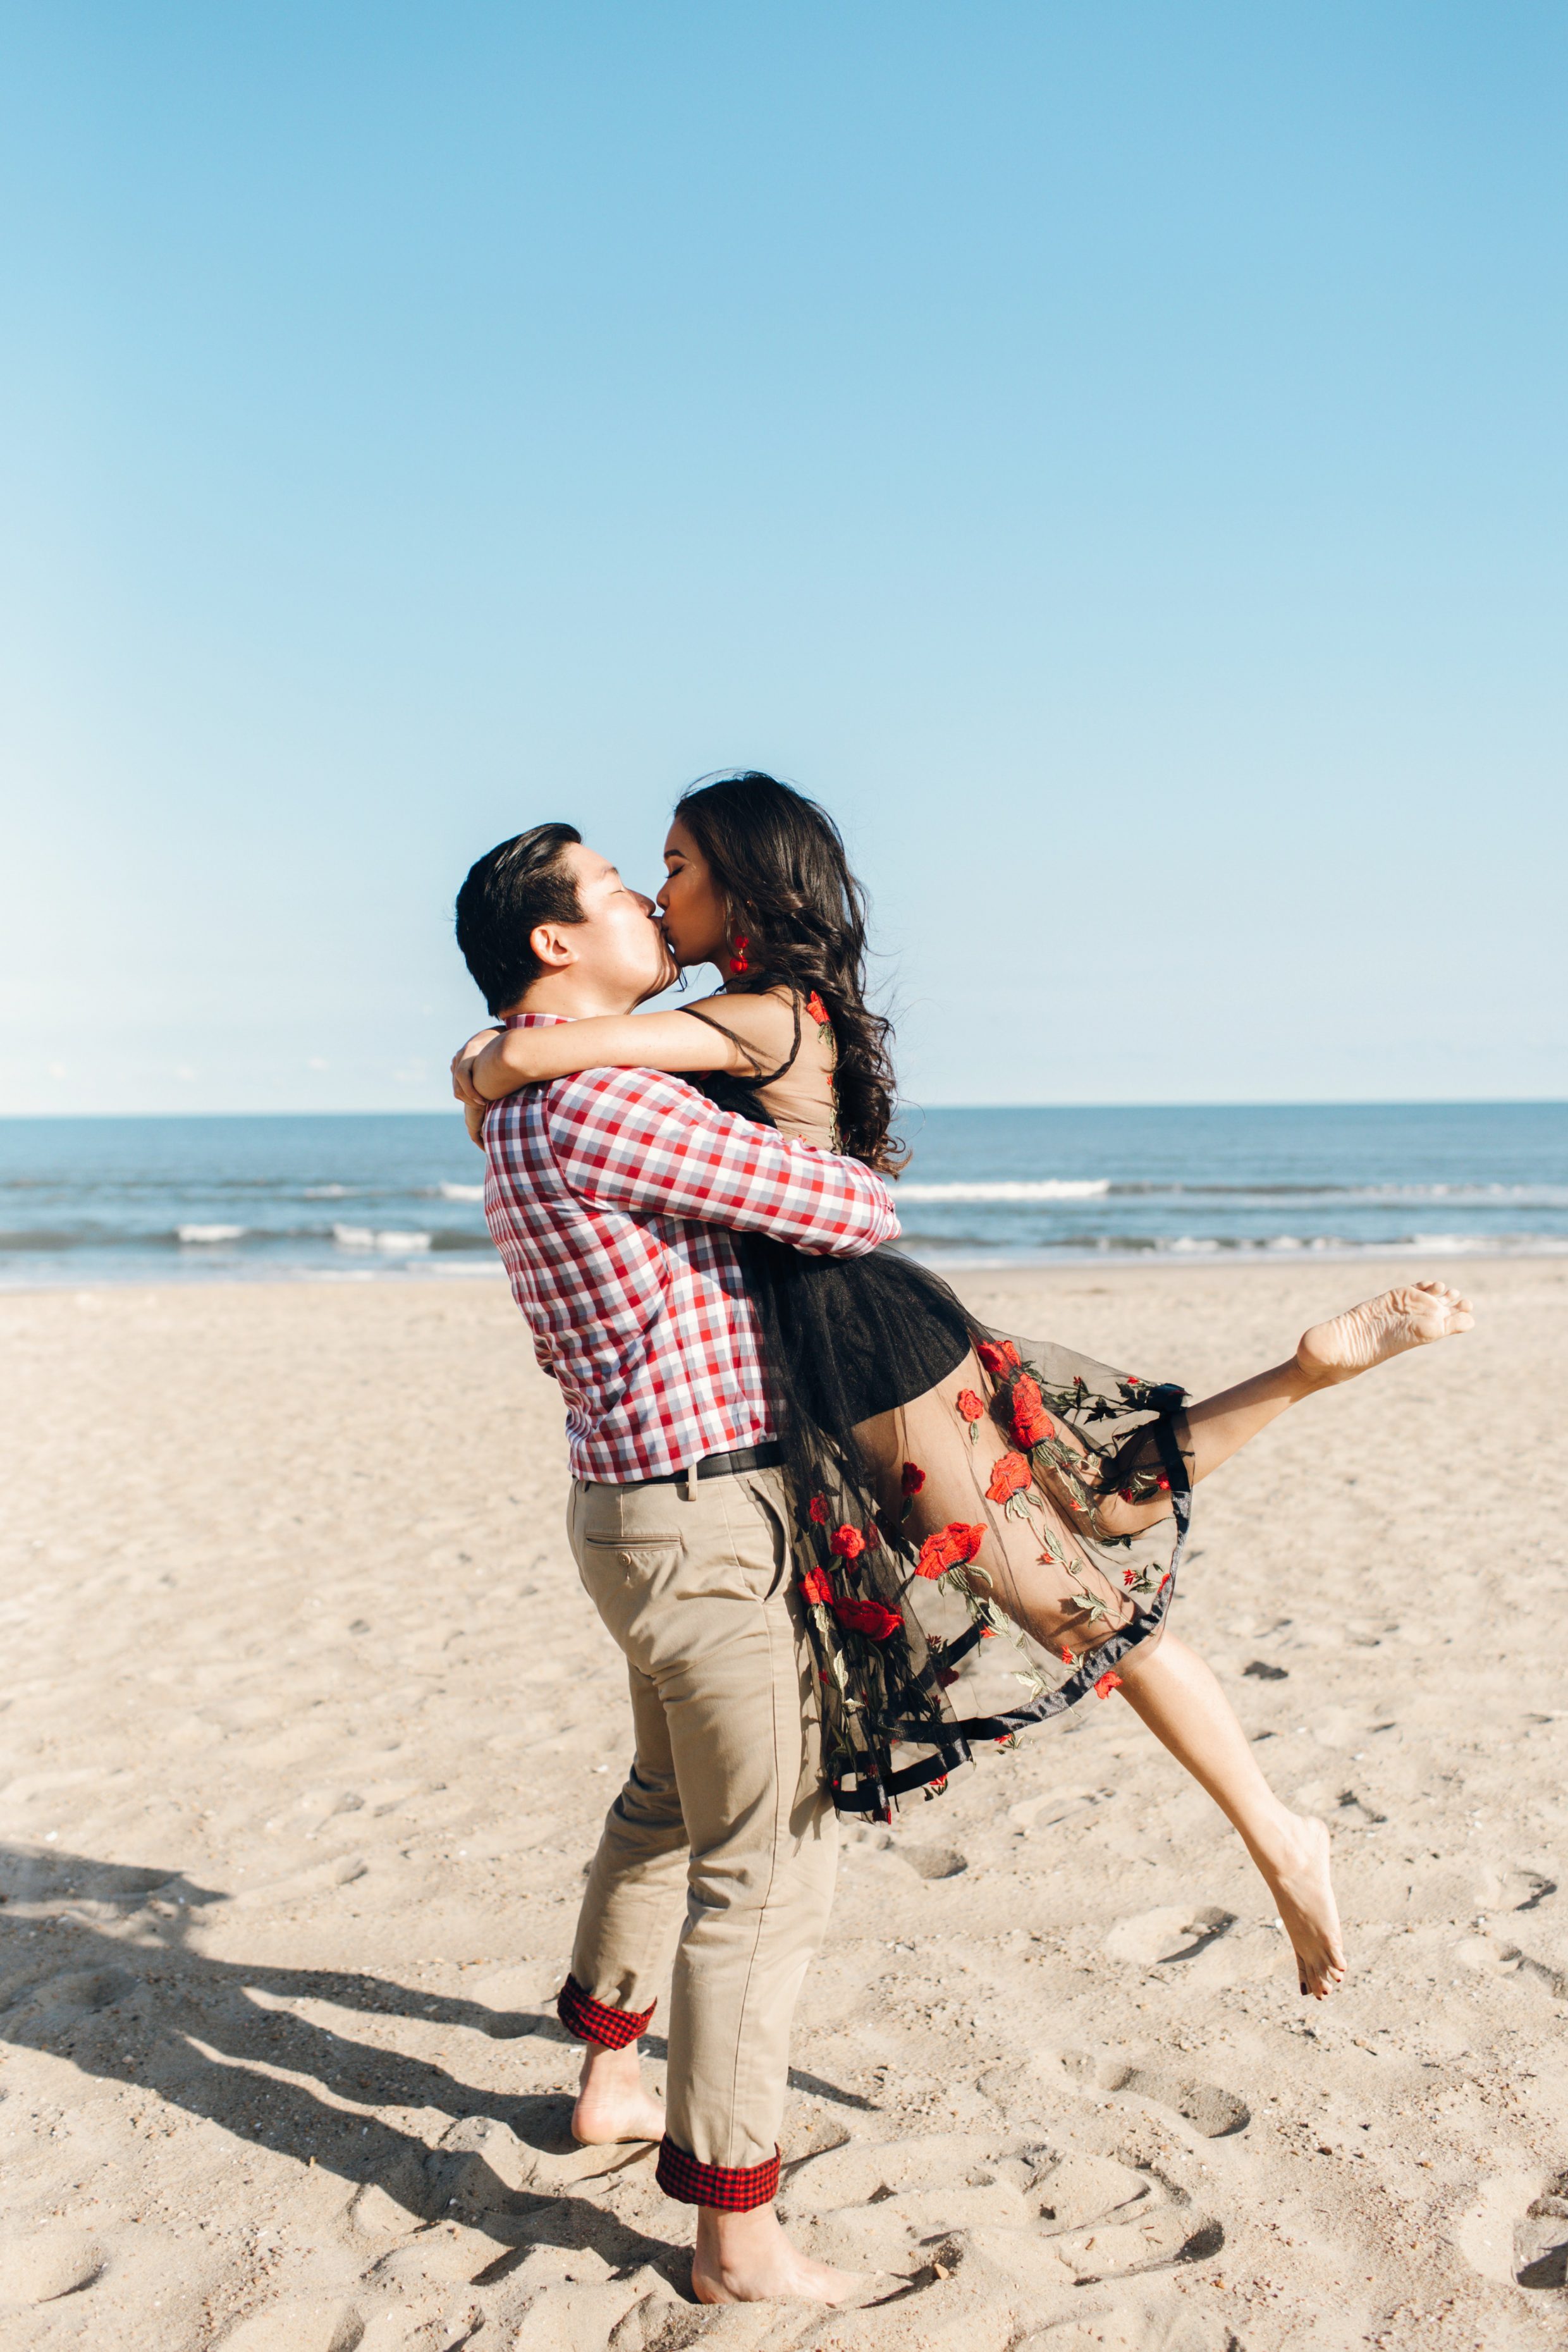 Eight Things Your Relationship Needs | Romantic Beach Photos